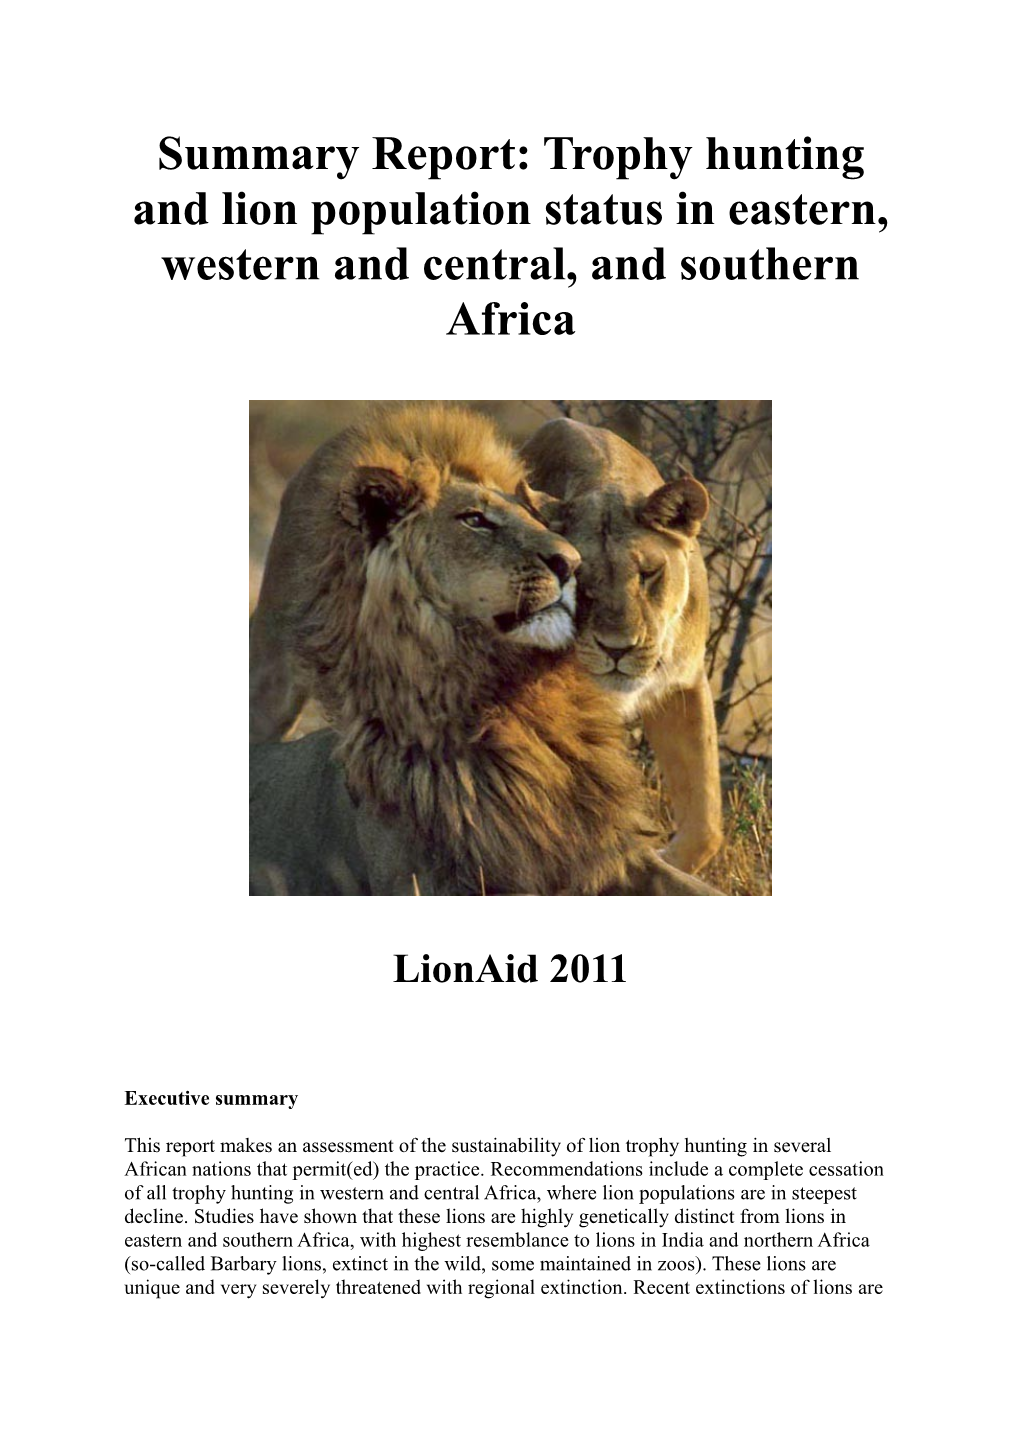 Trophy Hunting and Lion Population Status in Eastern, Western and Central, and Southern Africa